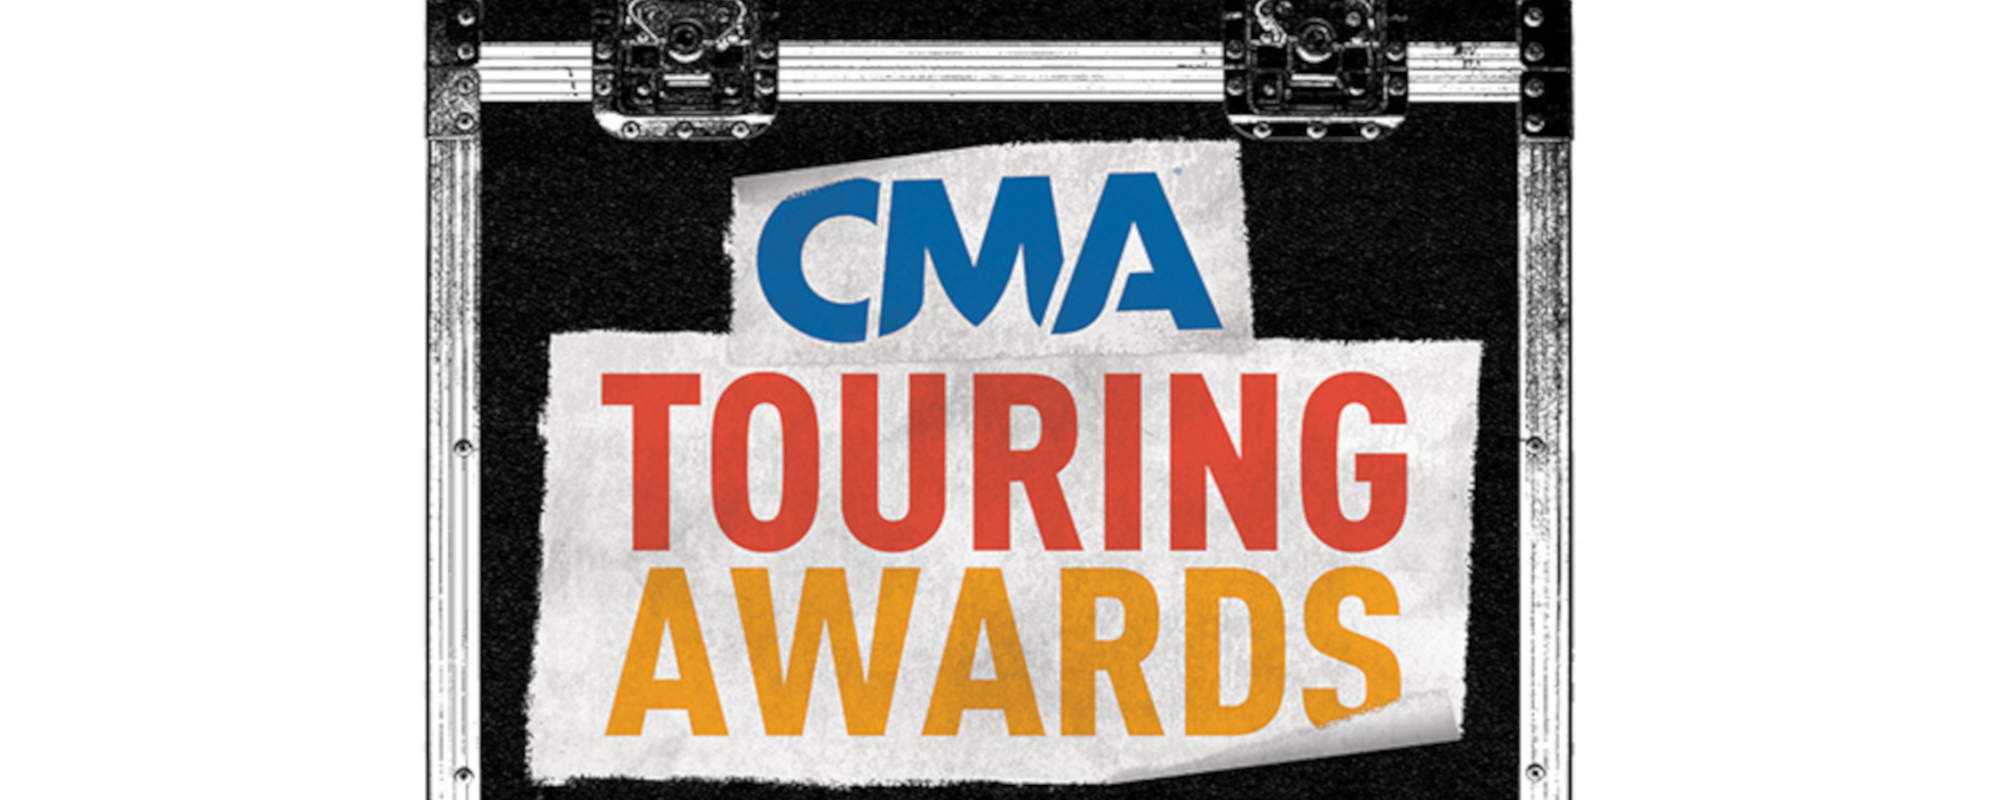 CMA Touring Awards Announced with 5 New Categories